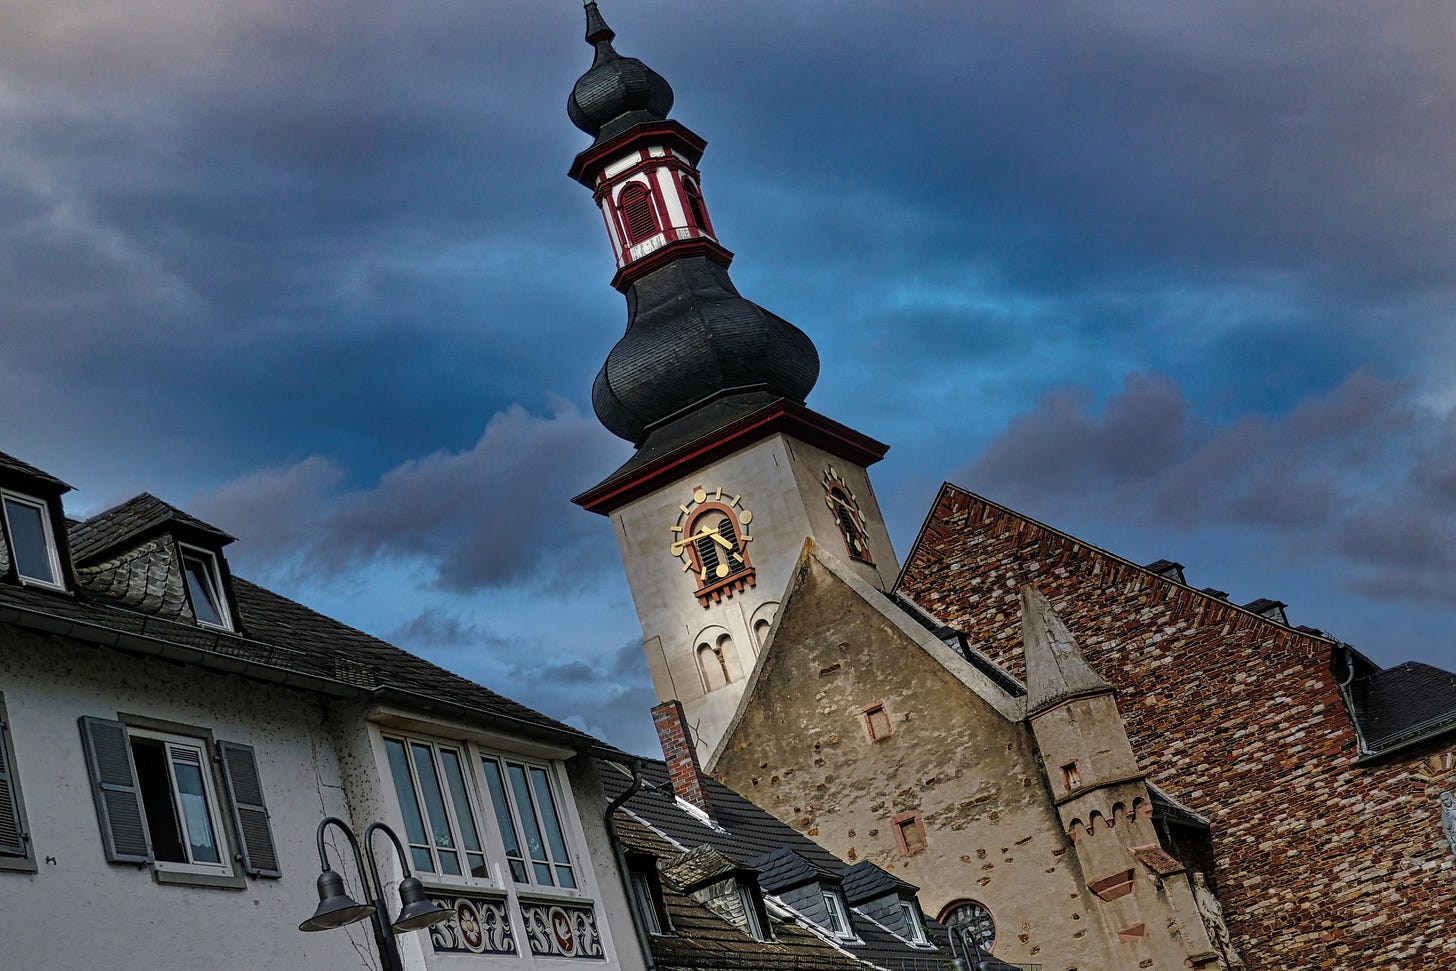 Buildings and a clock steeple tilted in the composition with dark blue and grey clouds in the sky